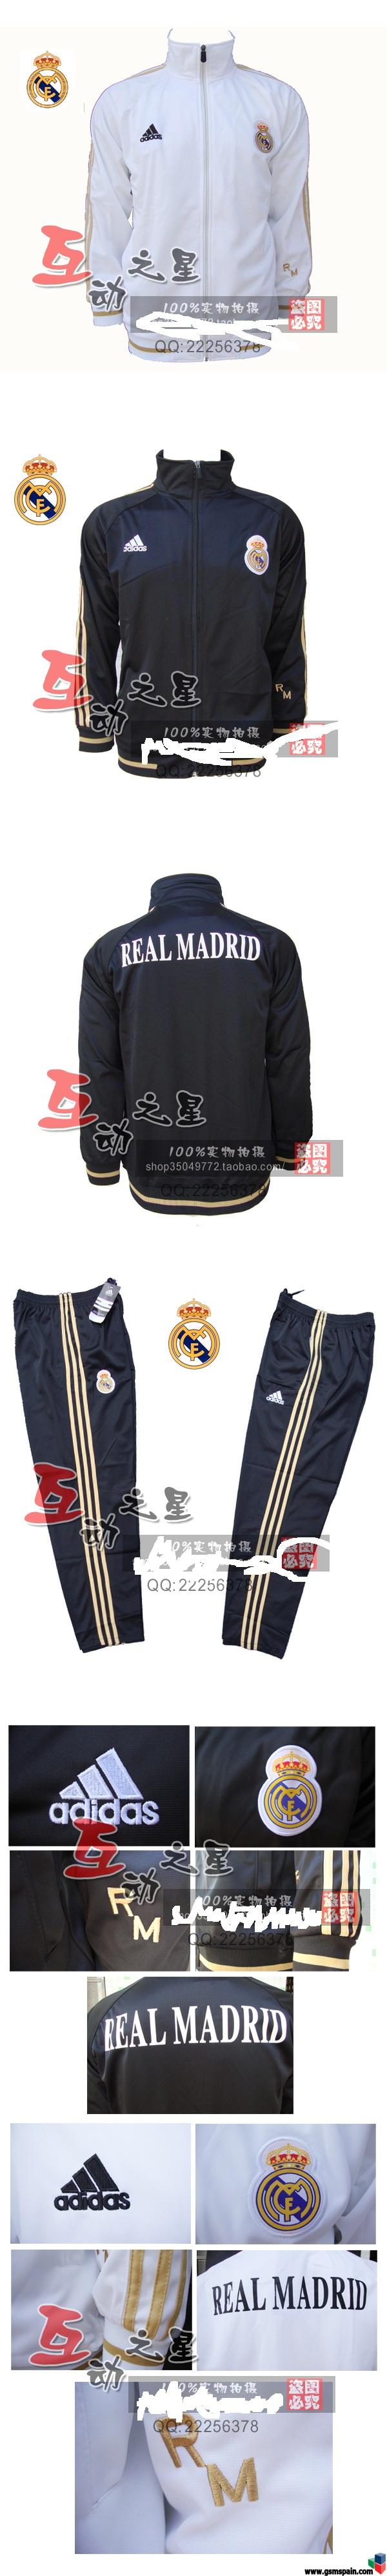 [COMPRO] Chandal Real Madrid 2011-2012